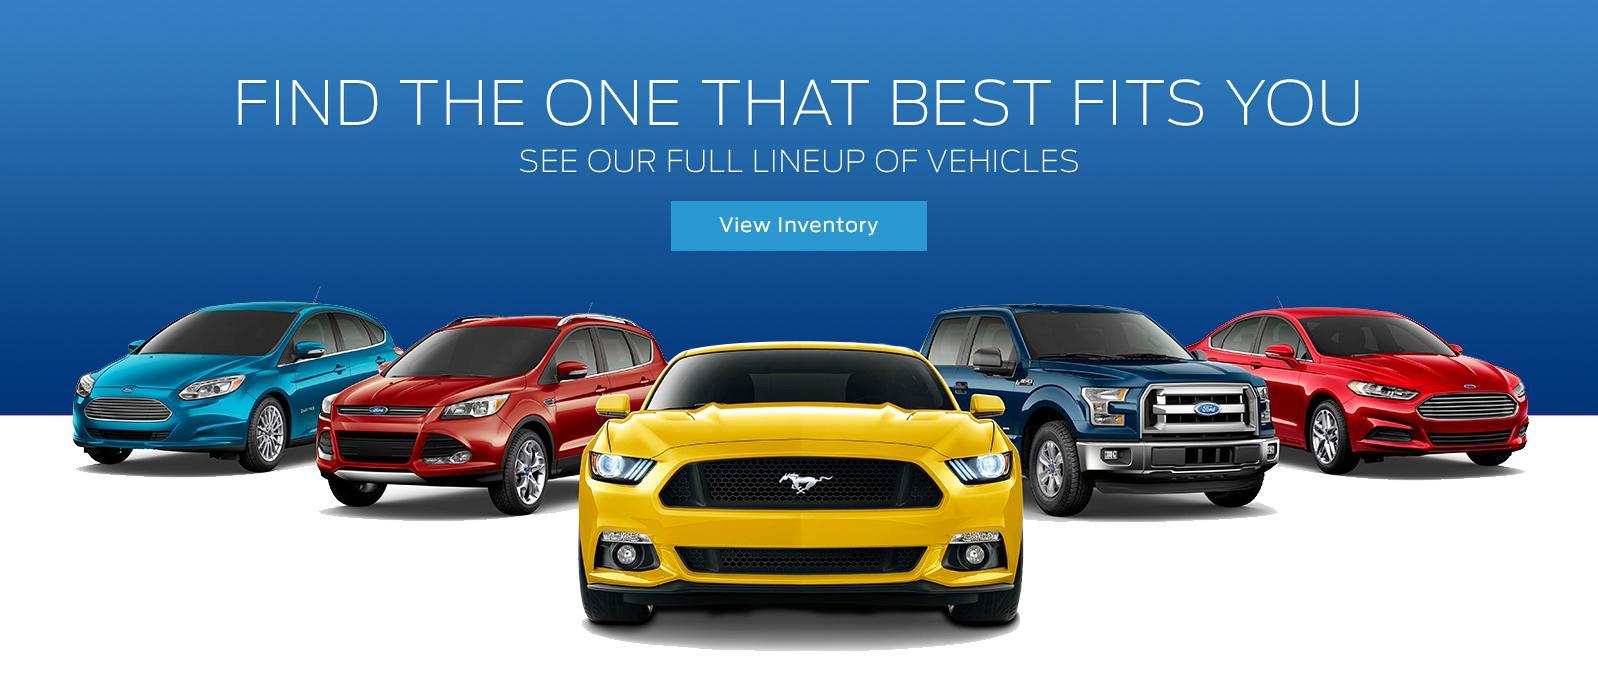 Ford model lineup for 2018.